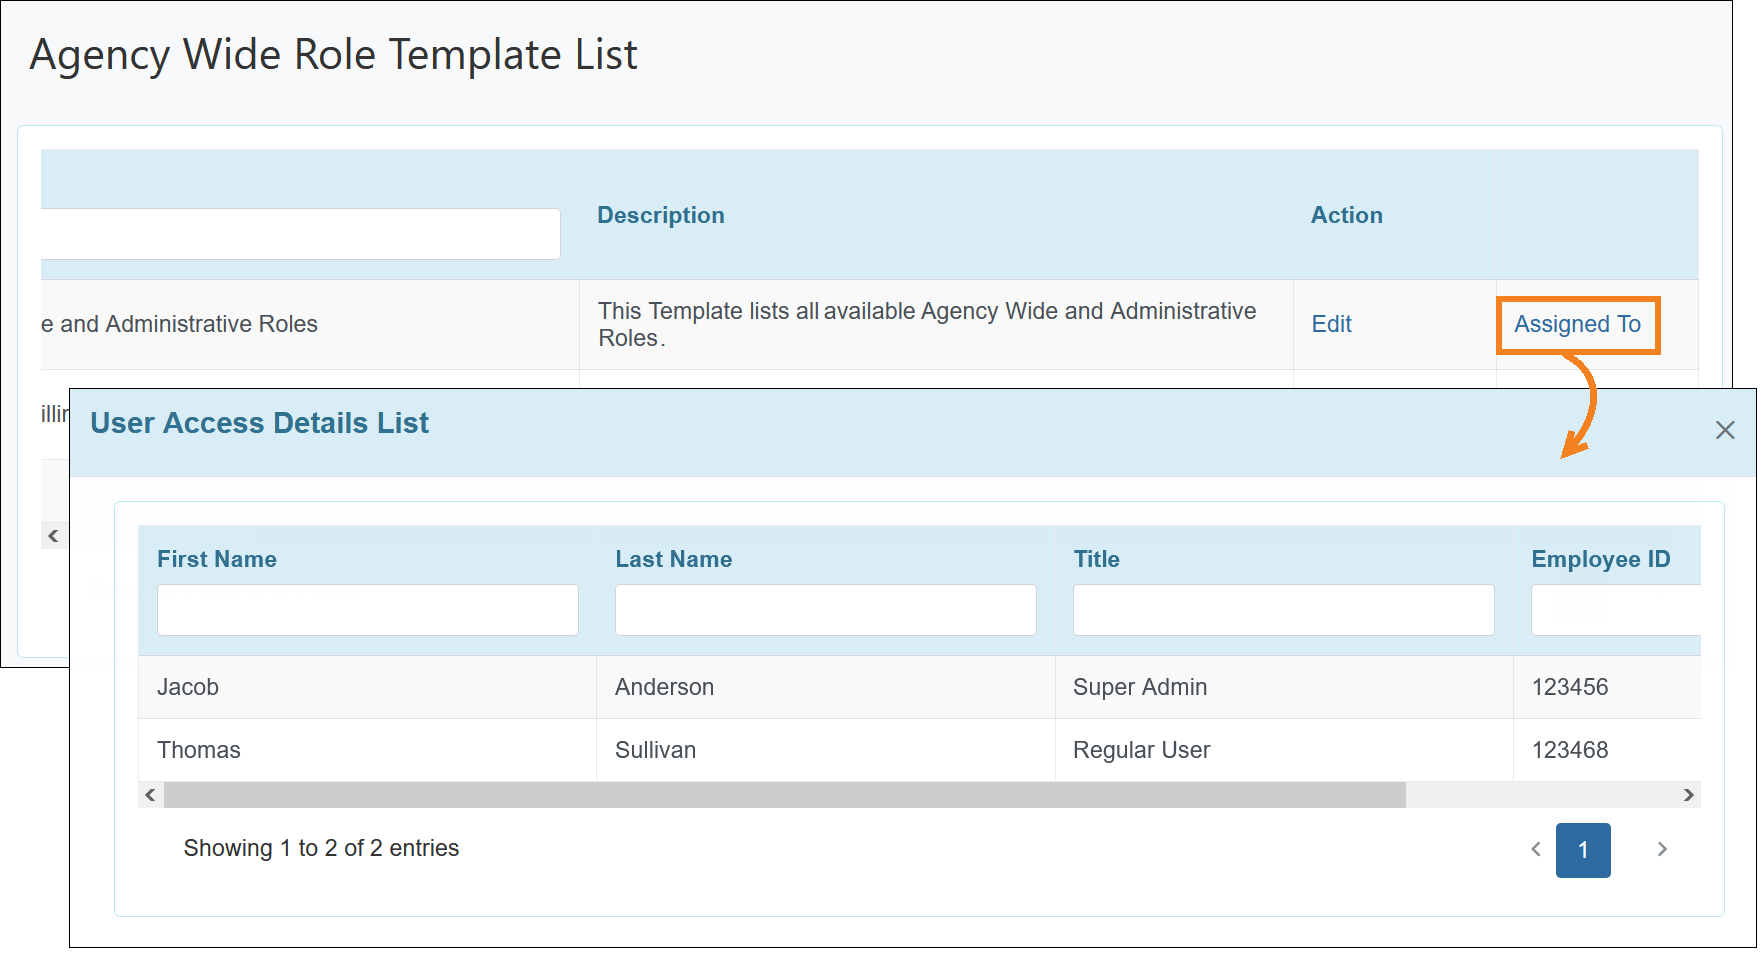 Screenshot showing the read-only Agency Wide Role Template Assinging feature